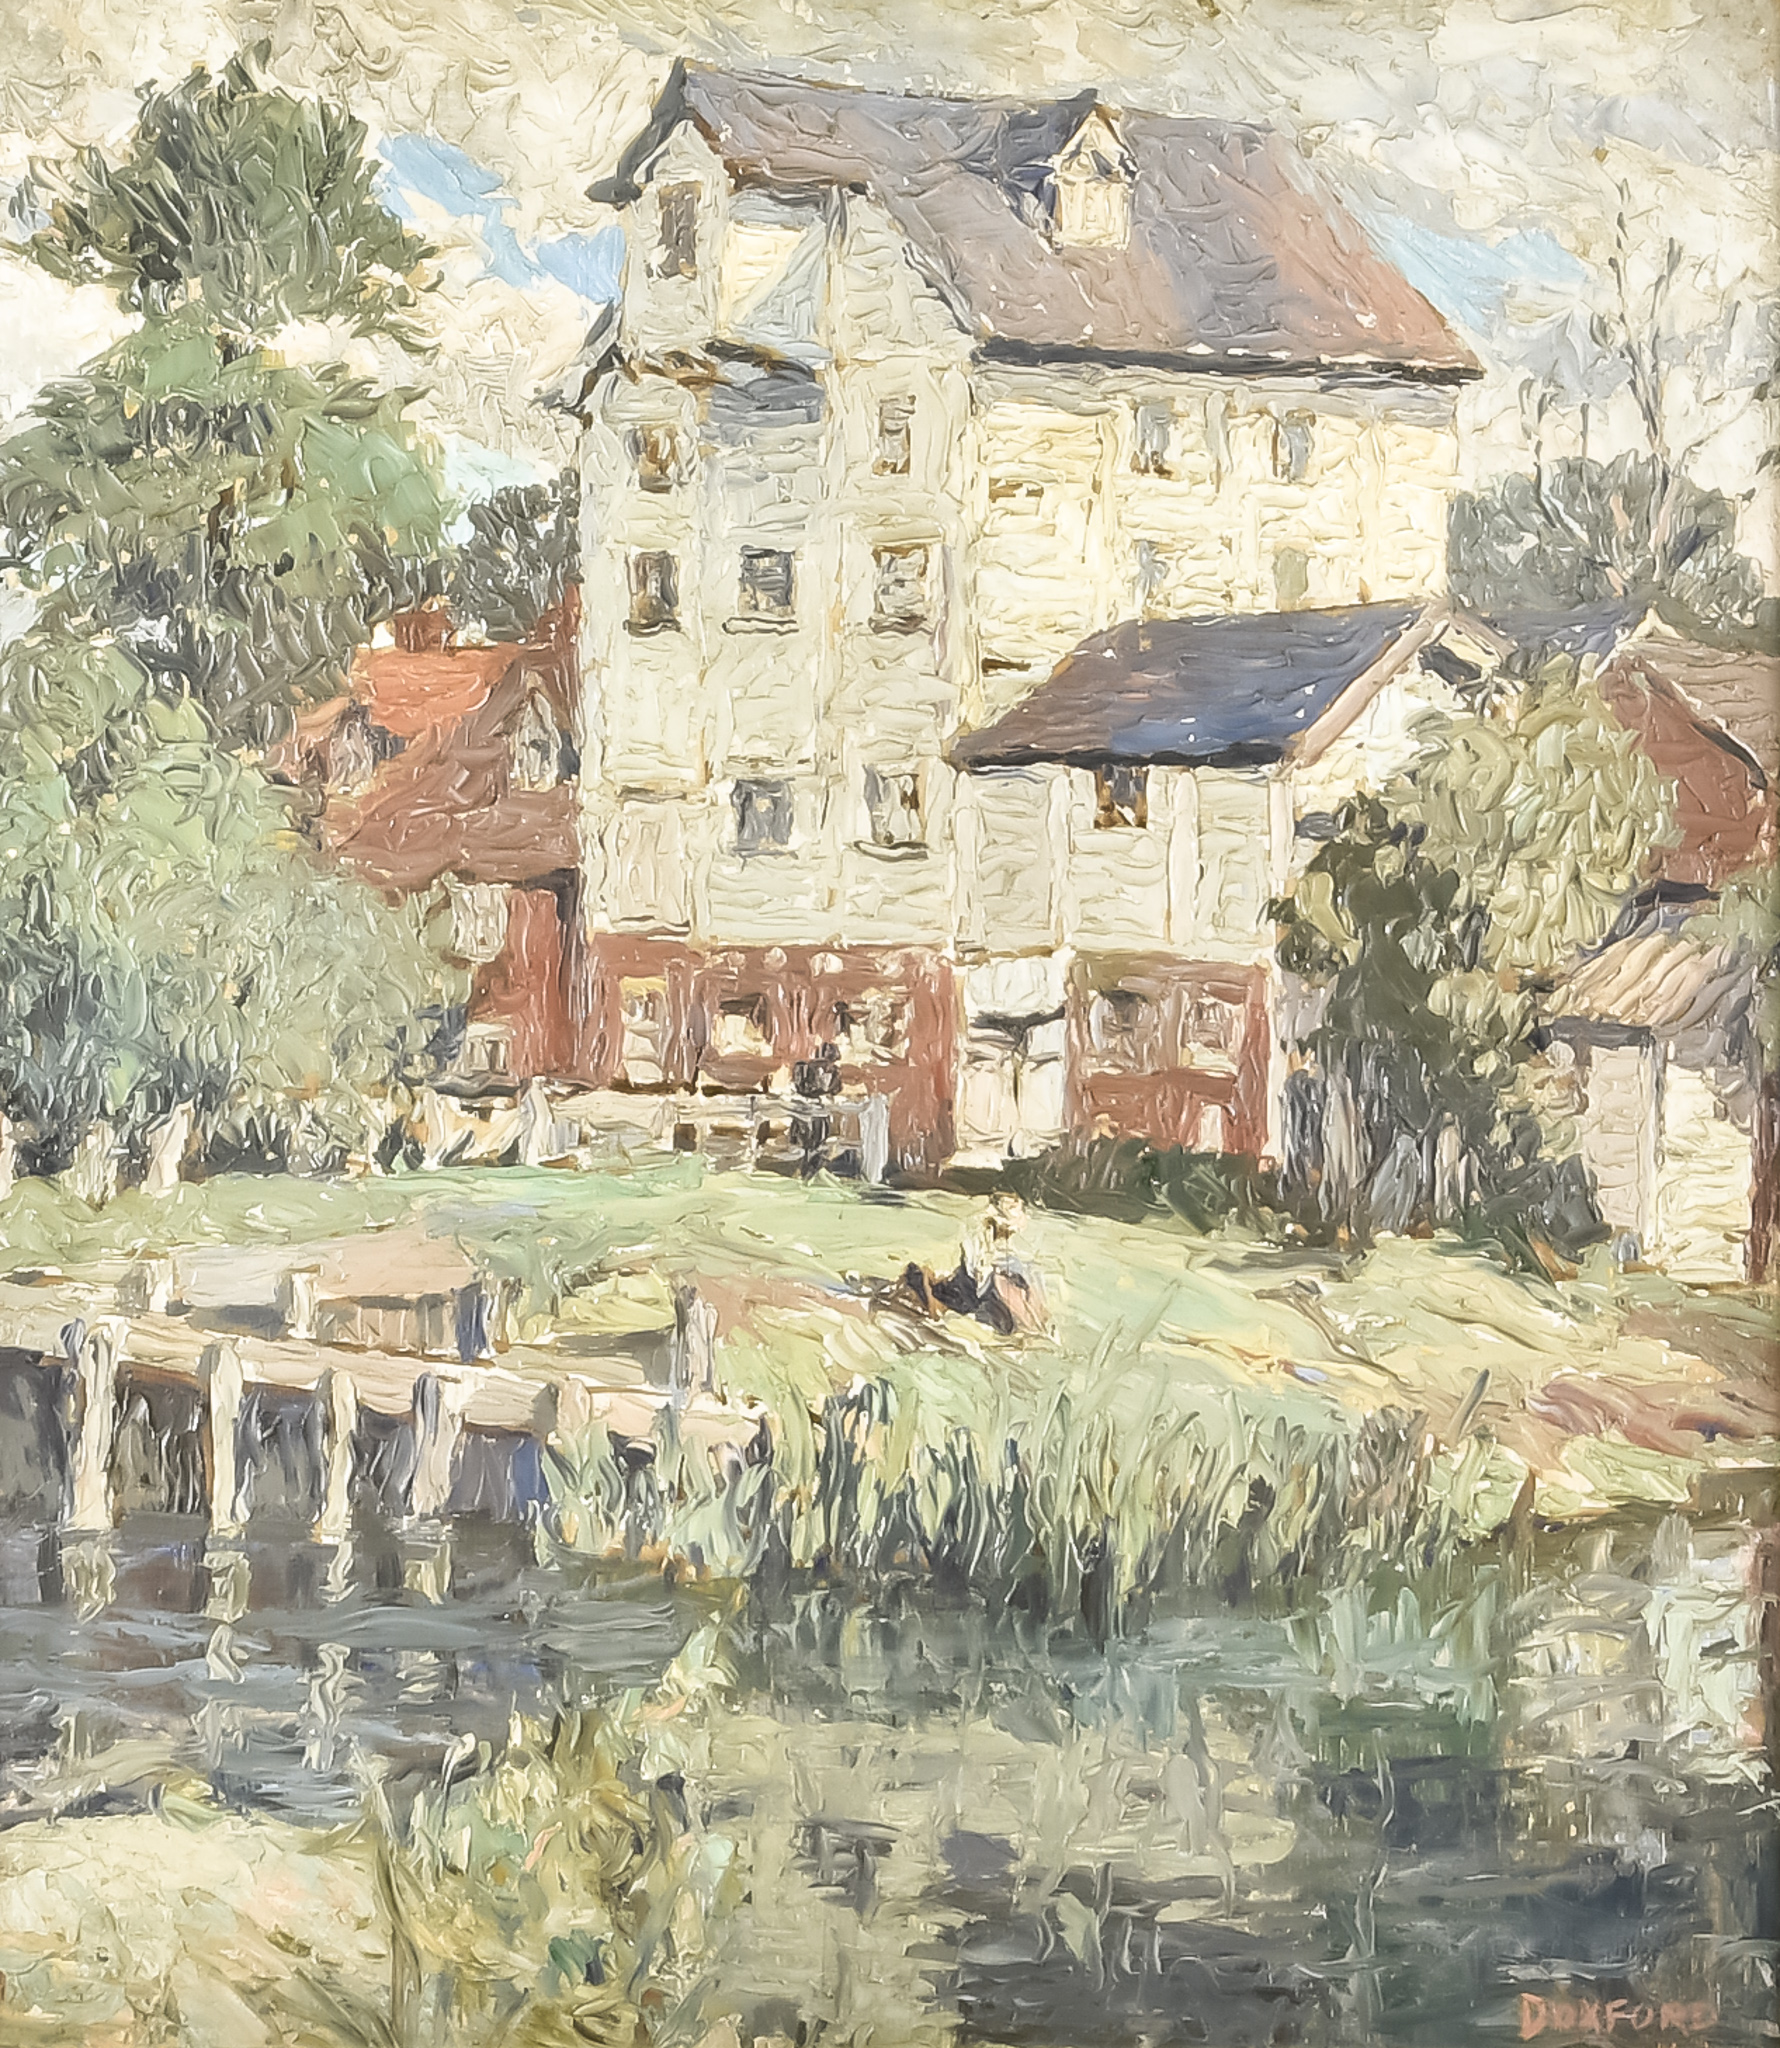 ***James Doxford (1899-1978) - Oil painting - "Chilham Mill", signed, canvas 17ins x 15ins, in